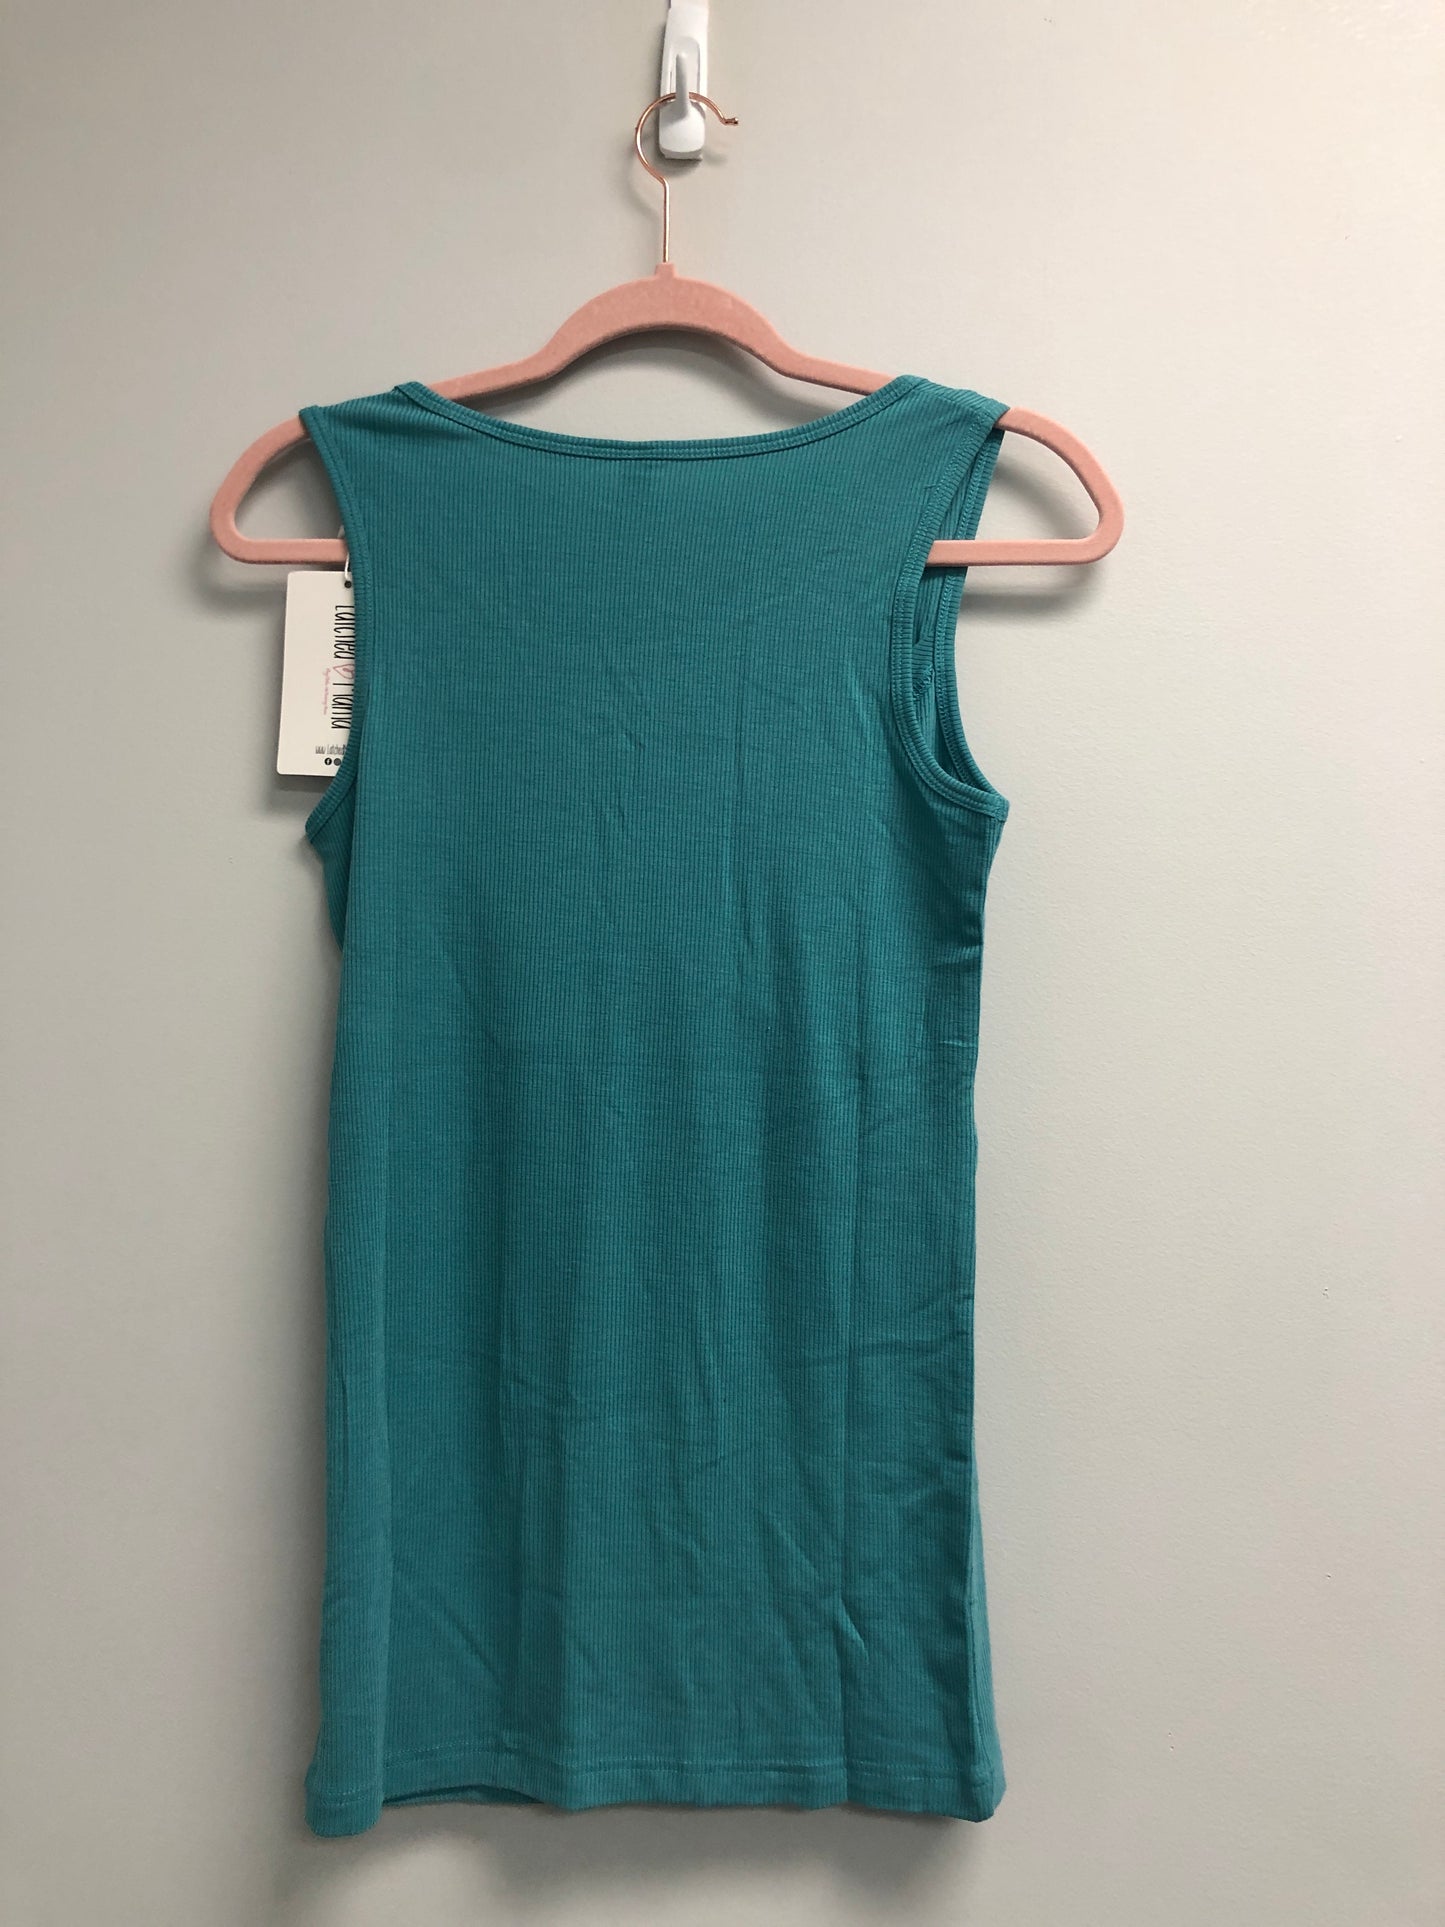 Outlet 6609 - Latched Mama Customized Mama with Kids Ribbed Nursing Tank - Teal - Extra Small